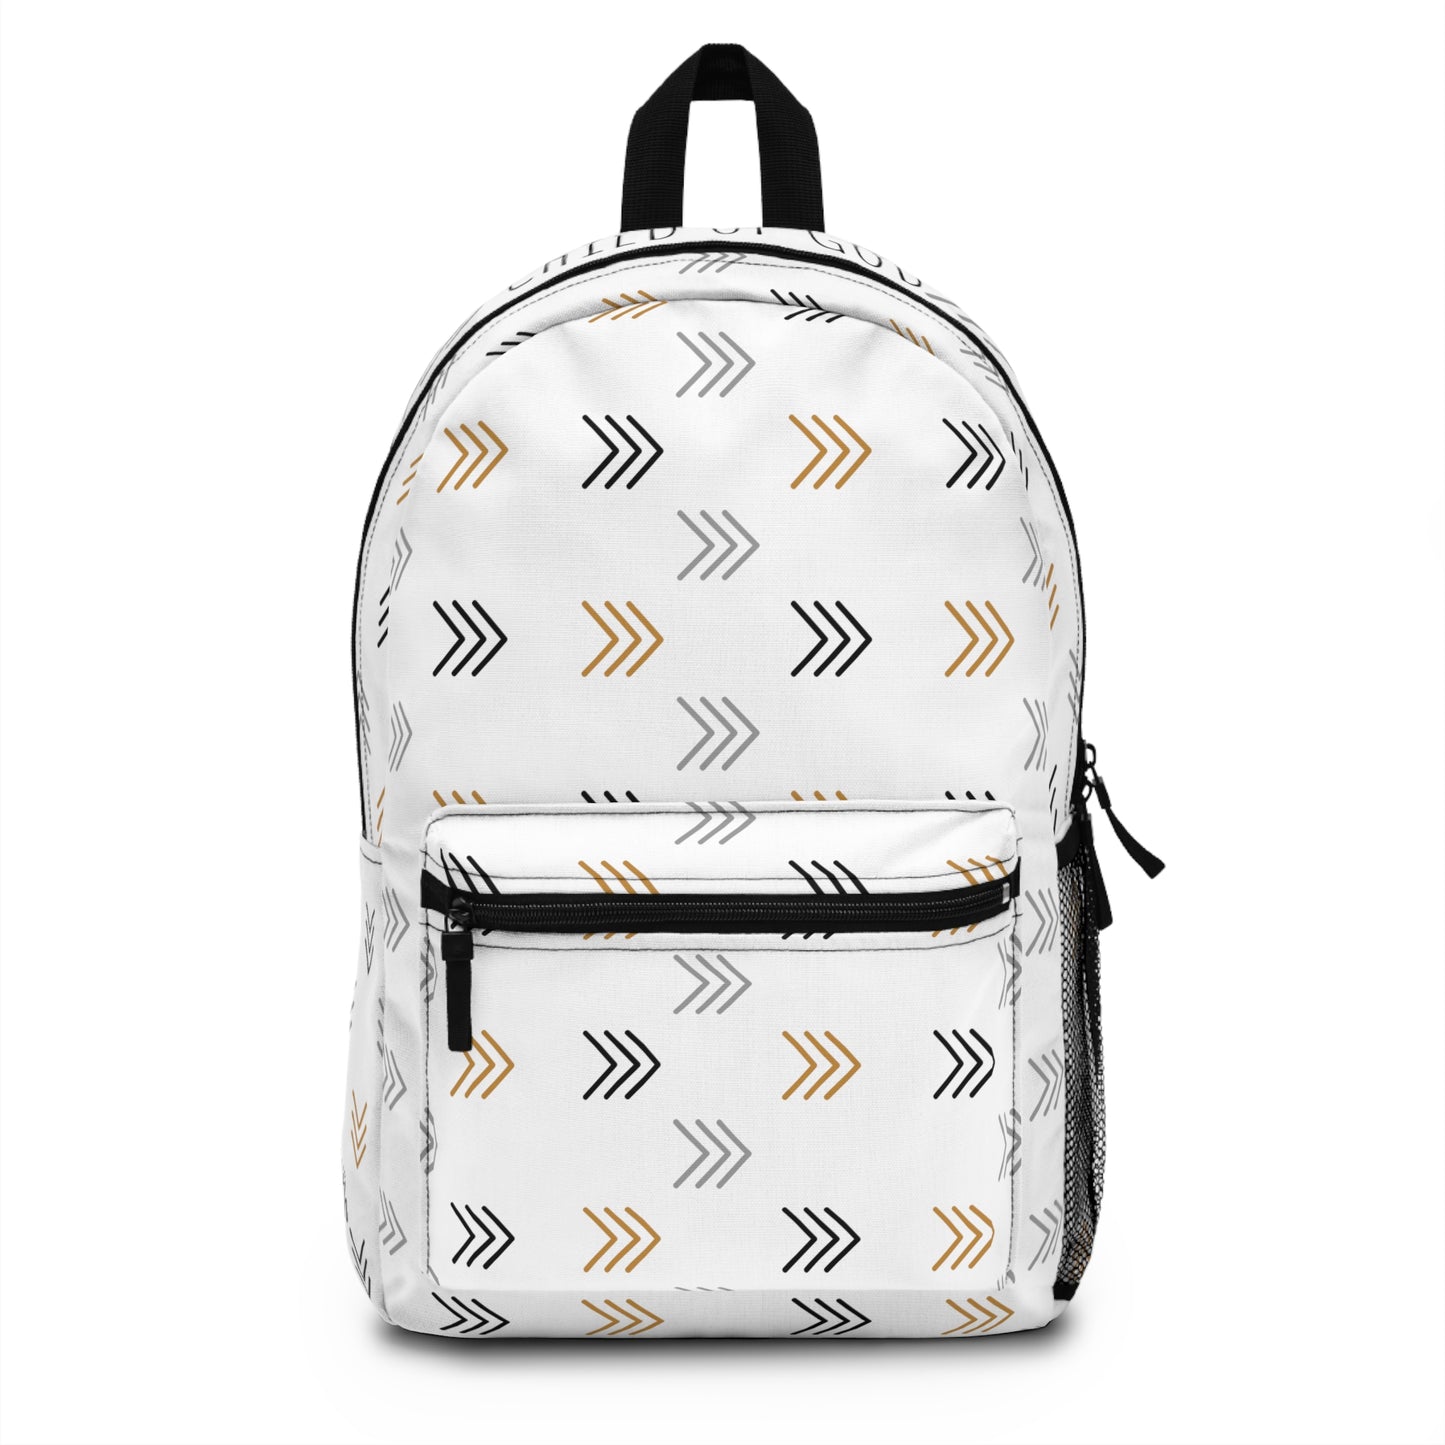 Boy's Child of God Backpack - Friends of the Faith